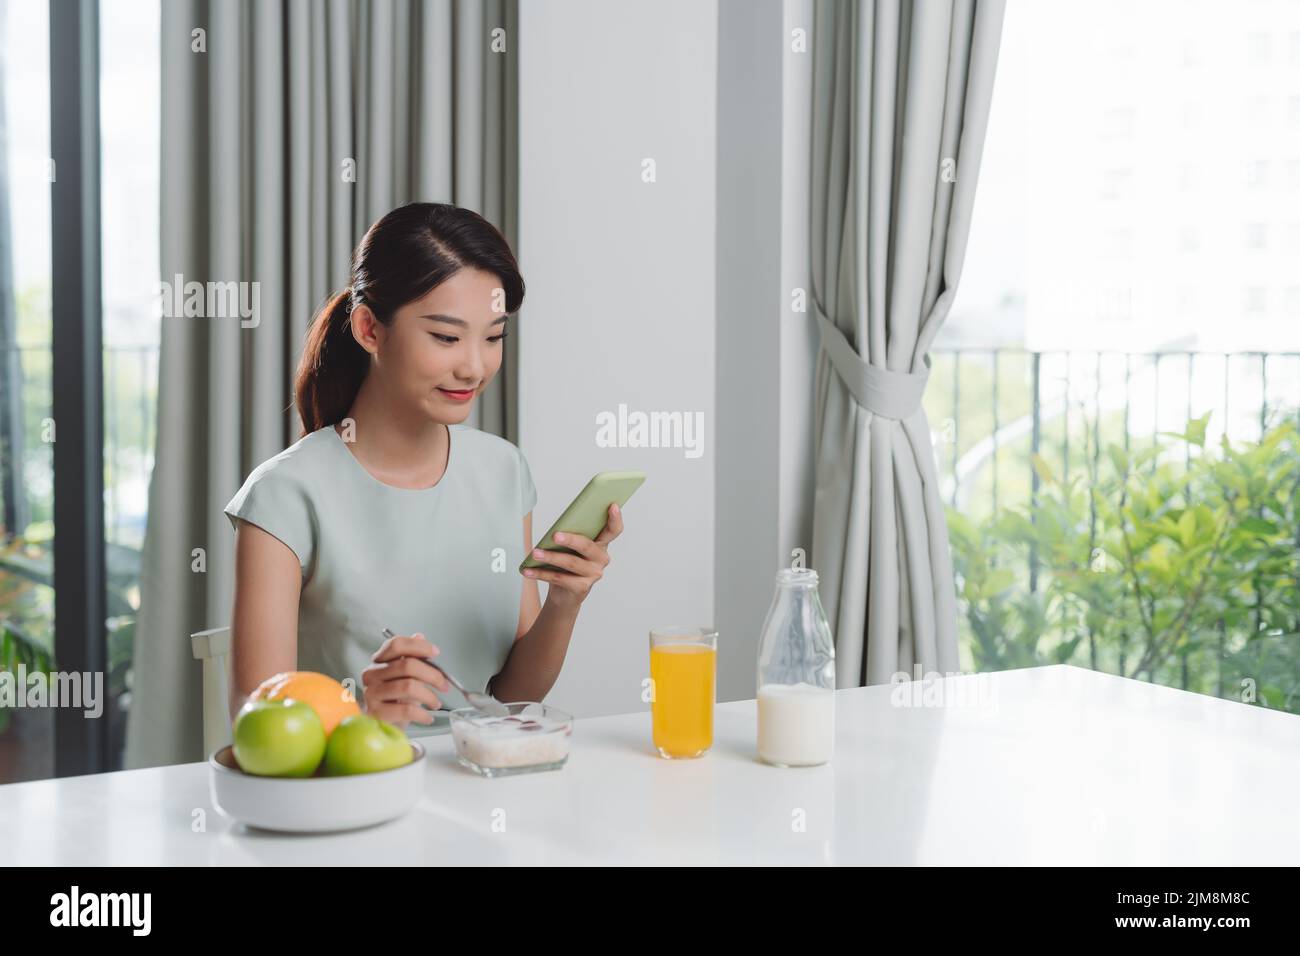 Woman Eating Breakfast Whilst Using Mobile Phone Stock Photo